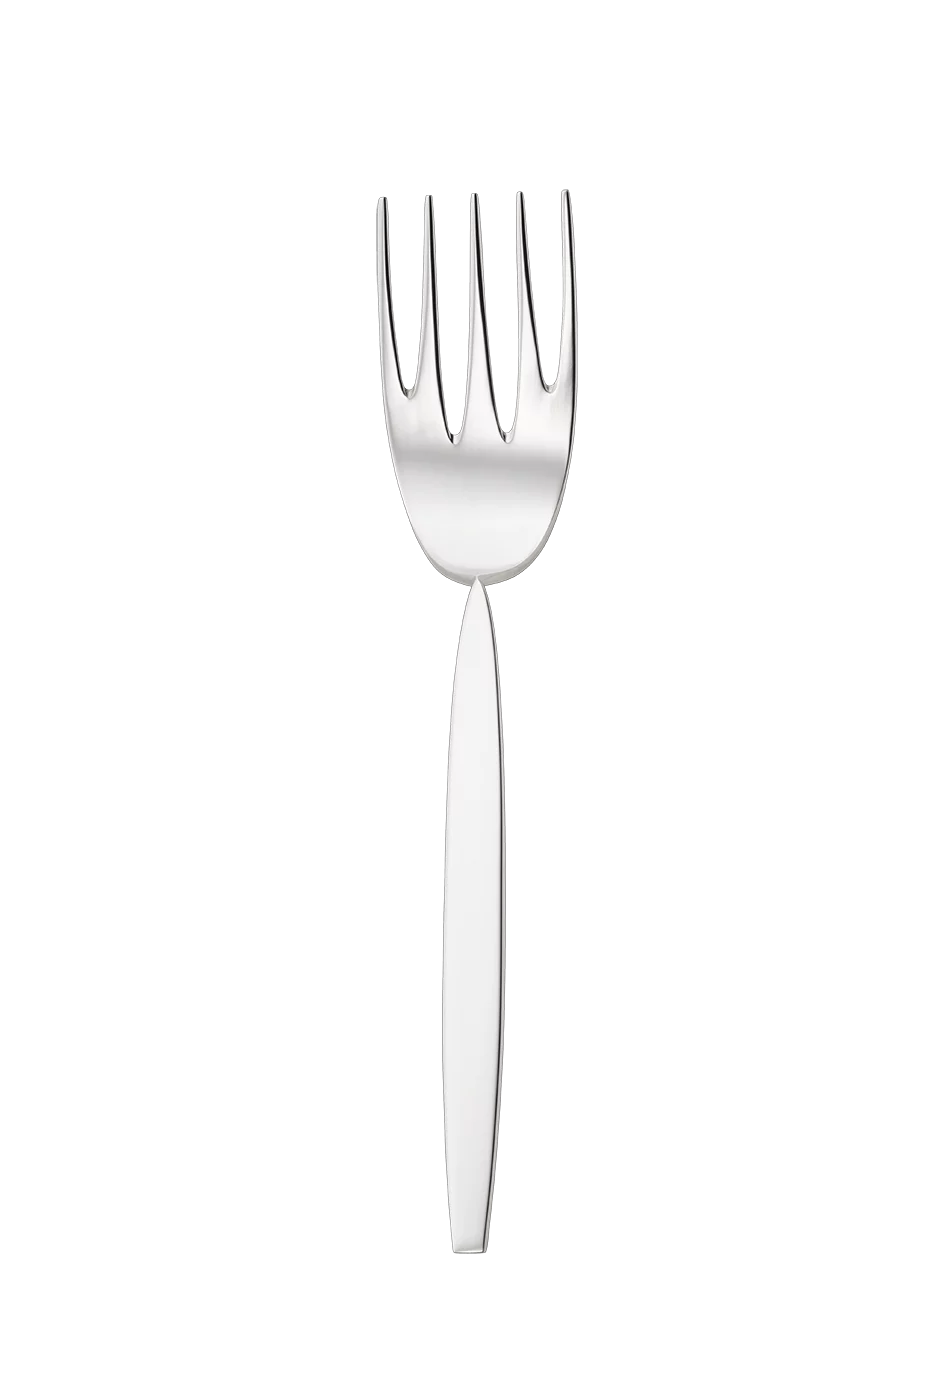 12" Fish Serving Fork (150g massive silverplated)